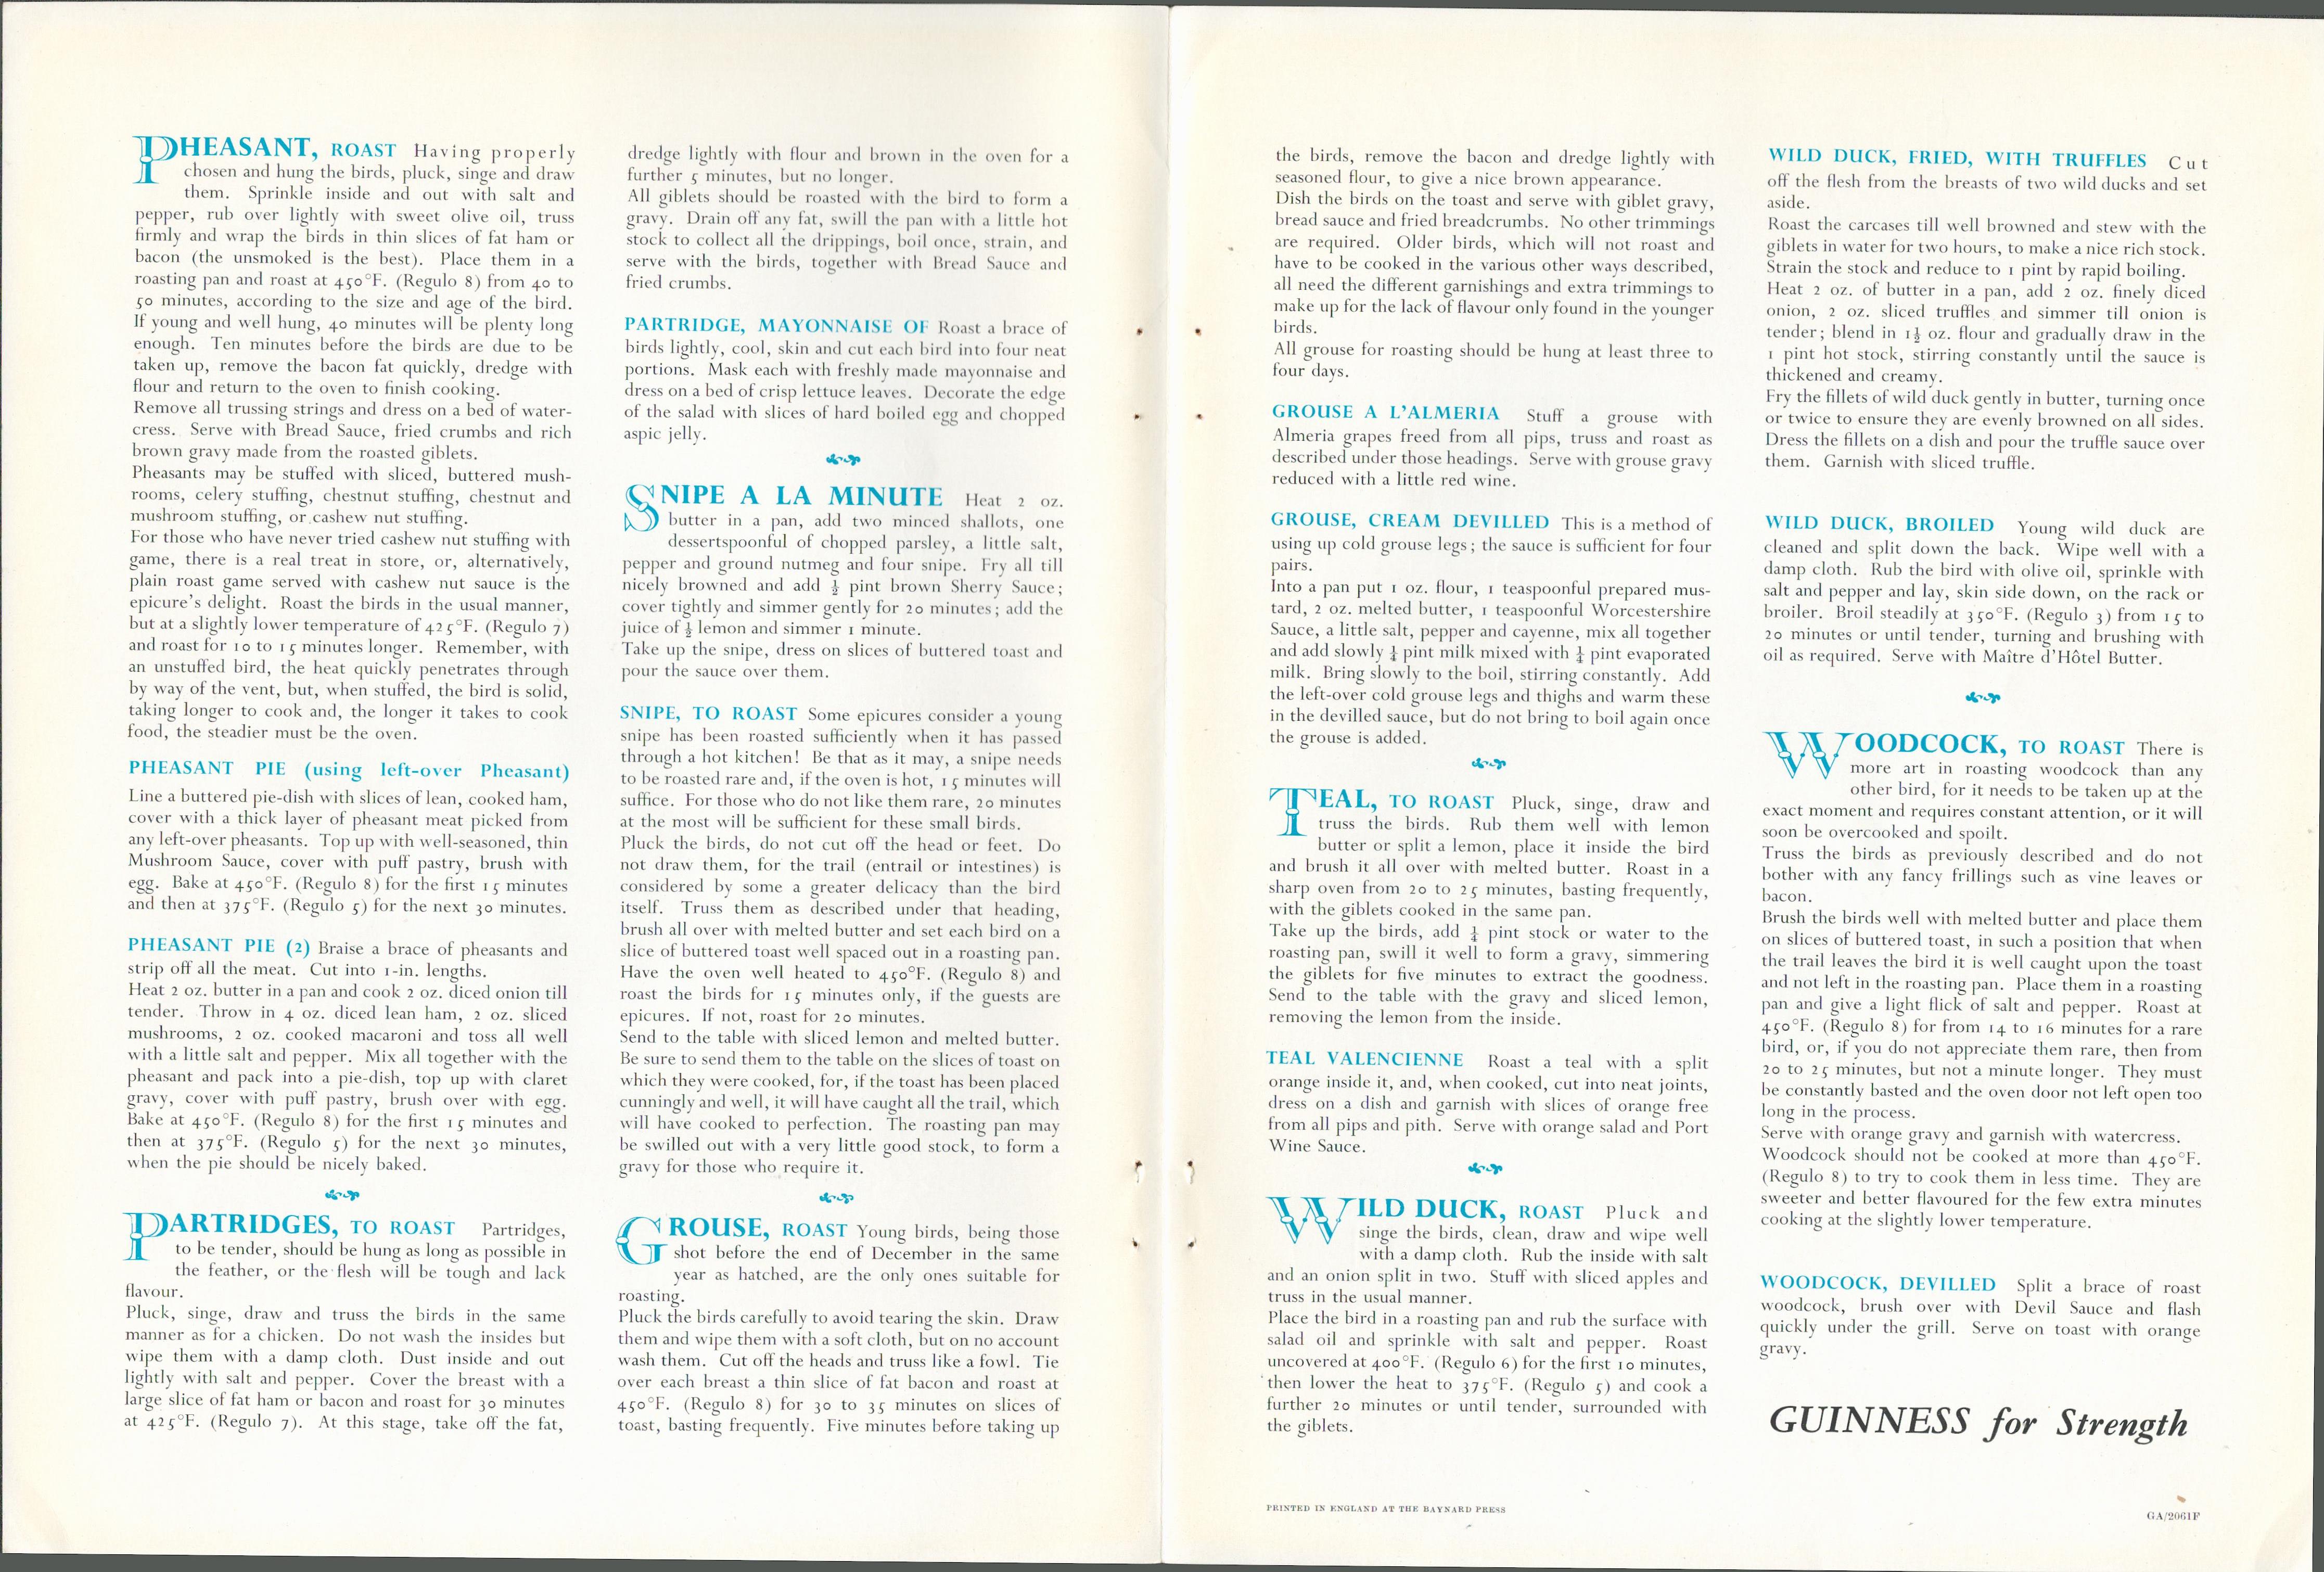 Double Sided Vintage 1961 Guinness Print Game Bird Recipes - Image 2 of 2